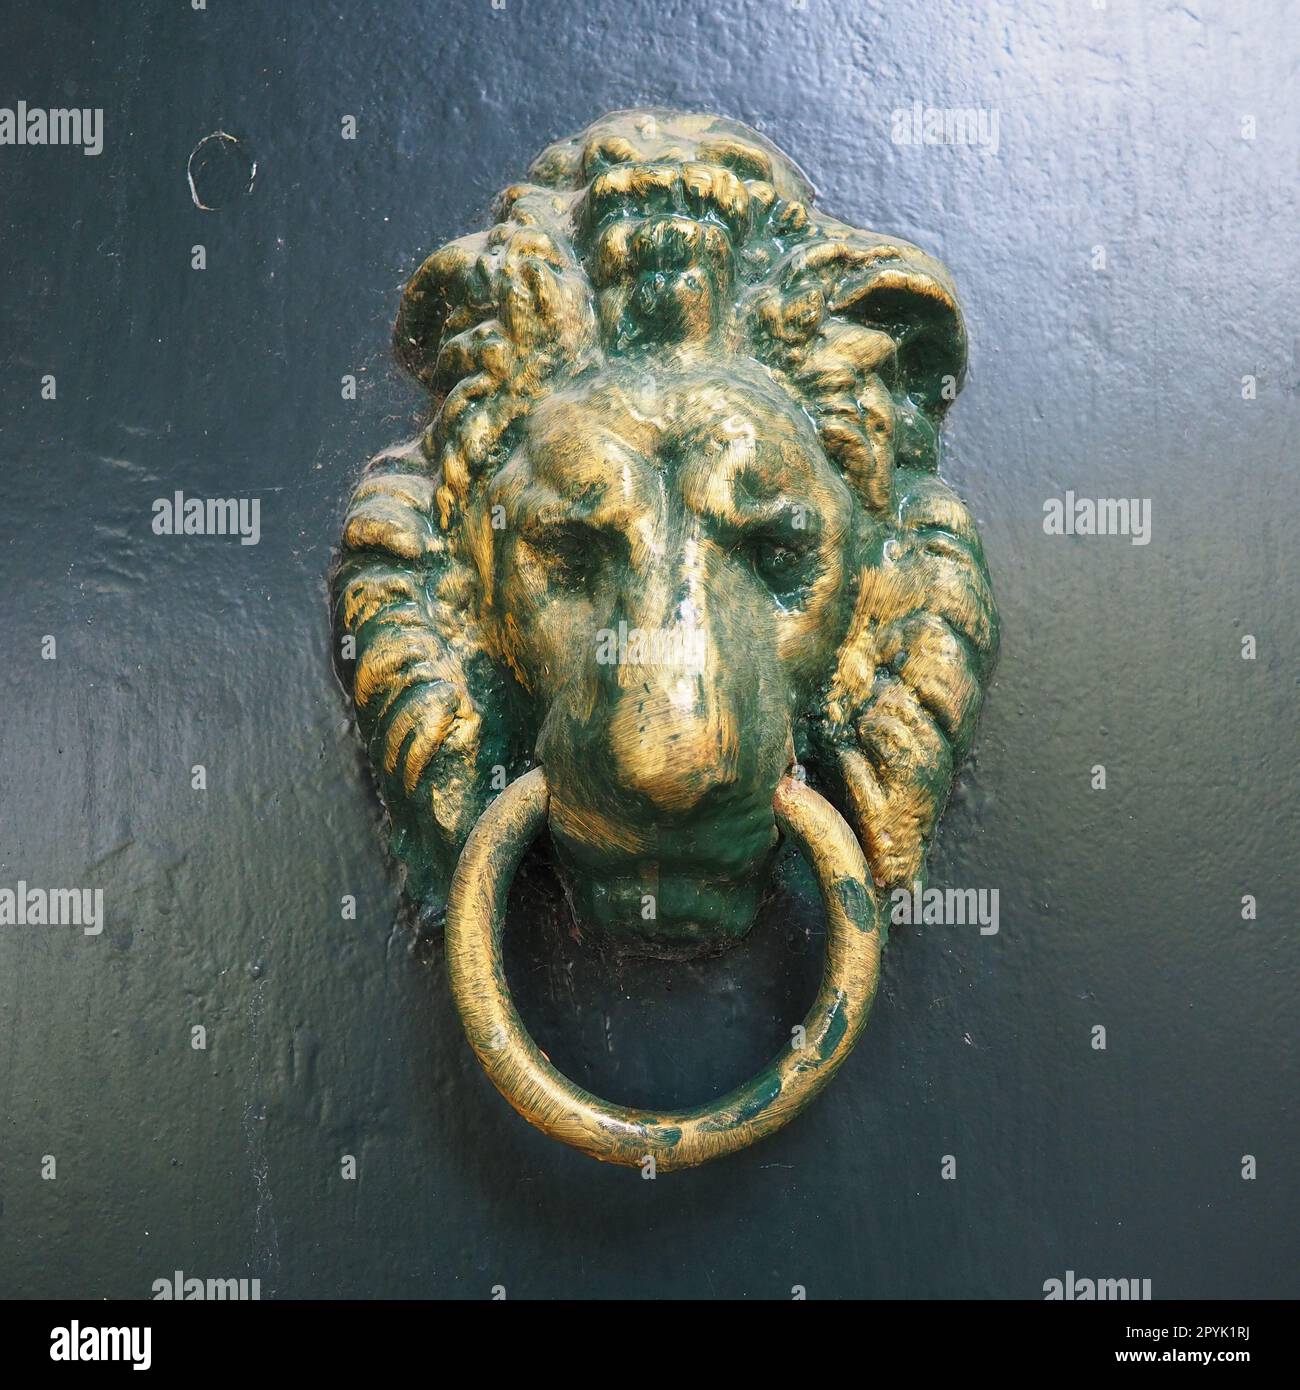 A door knocker is a fixture on the front door of a house. It is made of metal and has the form of a ring, which is knocked on the metal part of the door knocker fixed to the wall. Muzzle of a lion. Stock Photo